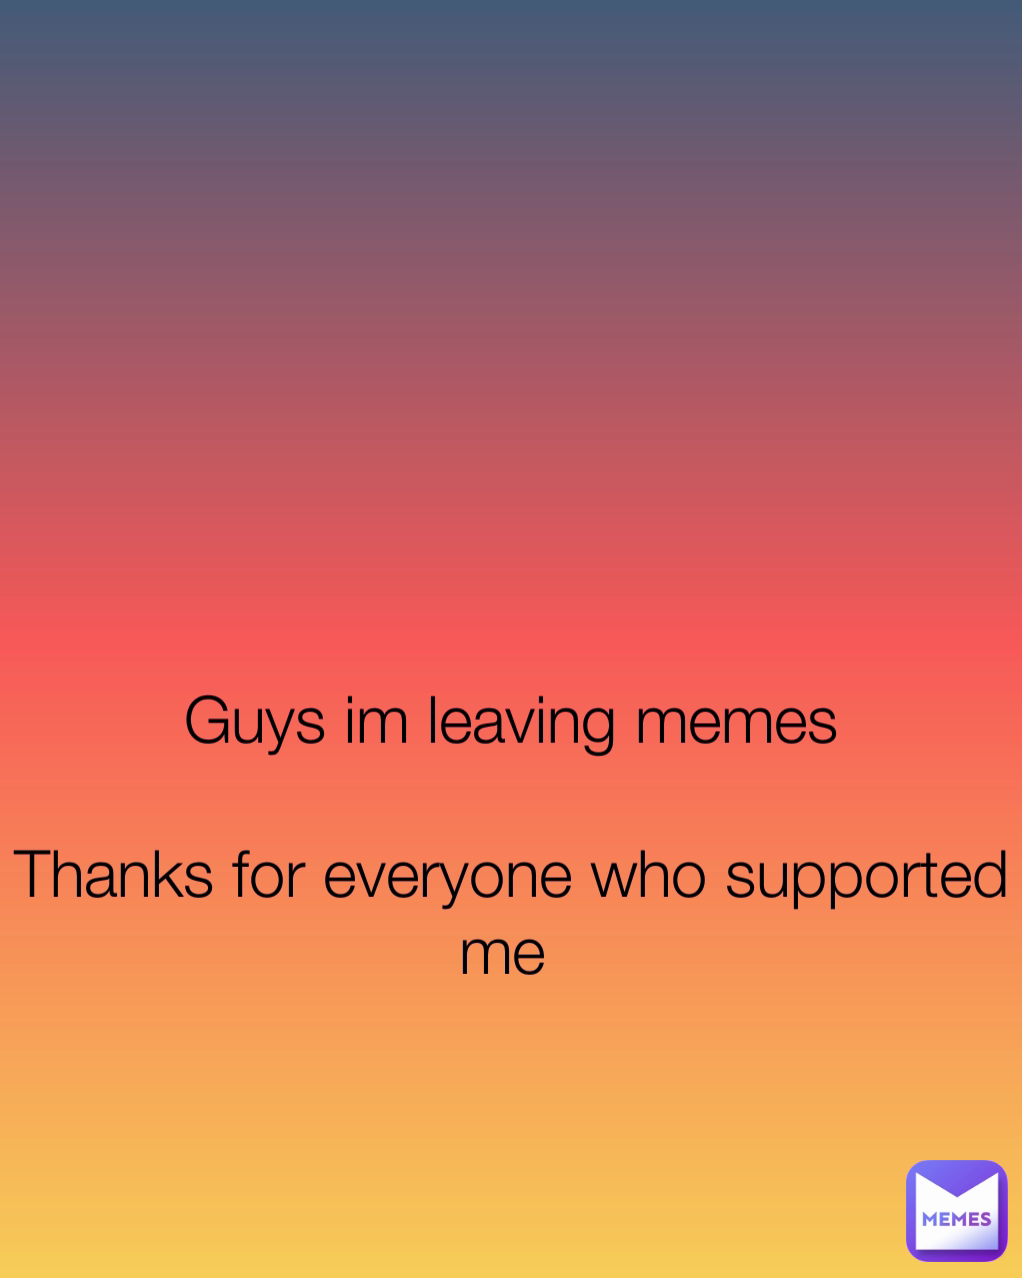 




Guys im leaving memes

Thanks for everyone who supported me 